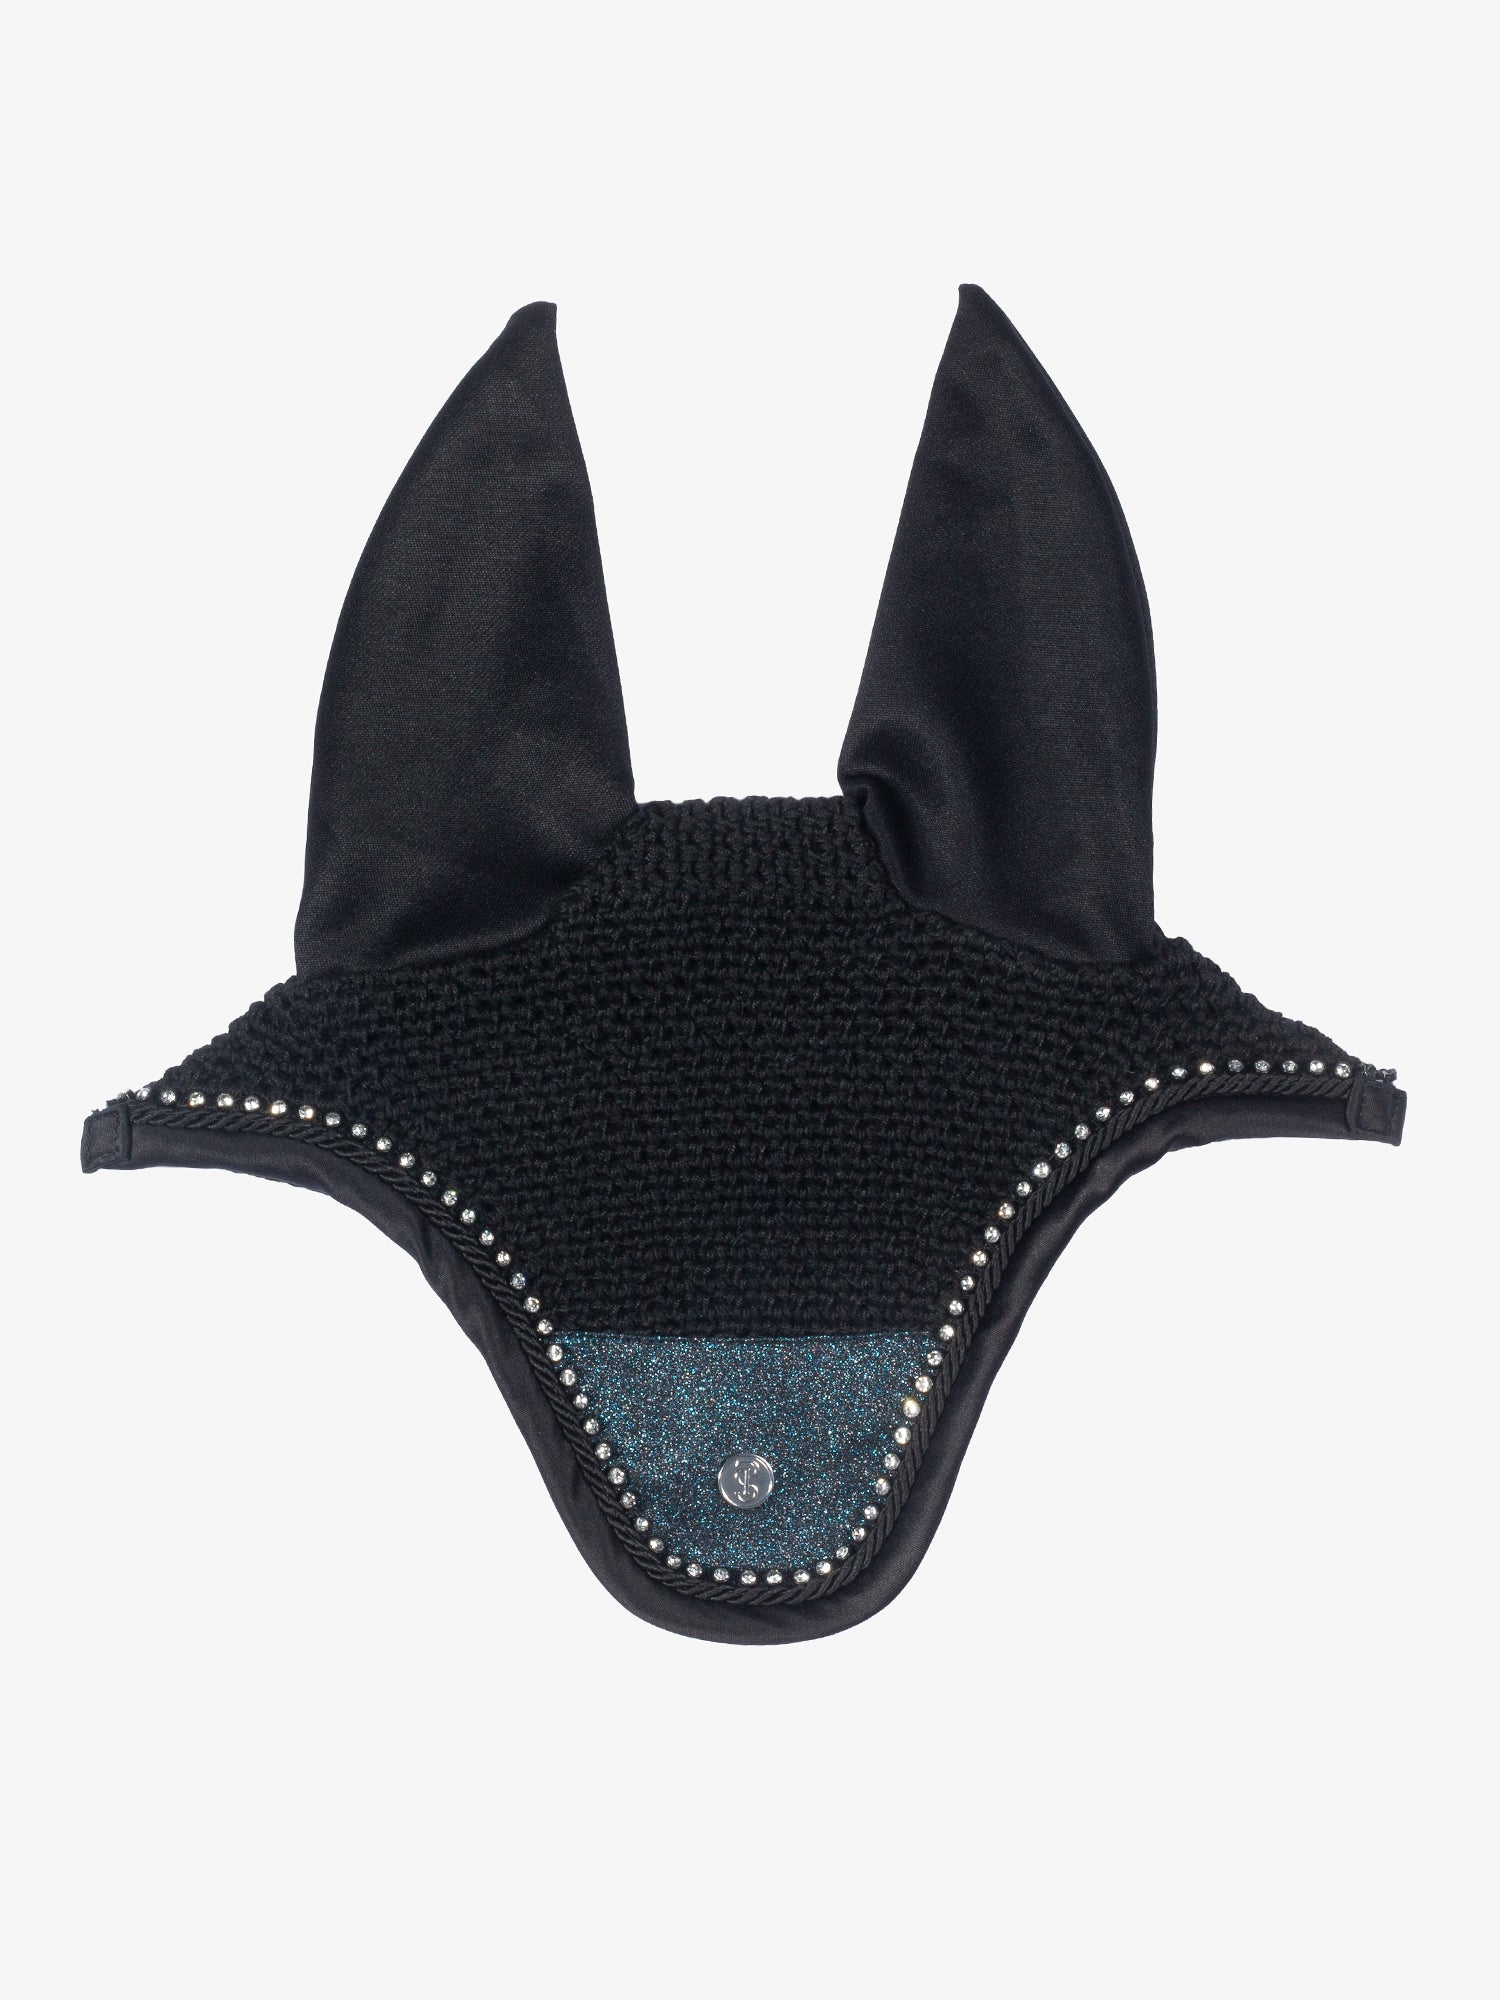 PS of Sweden sparkly teal stardust fly hood